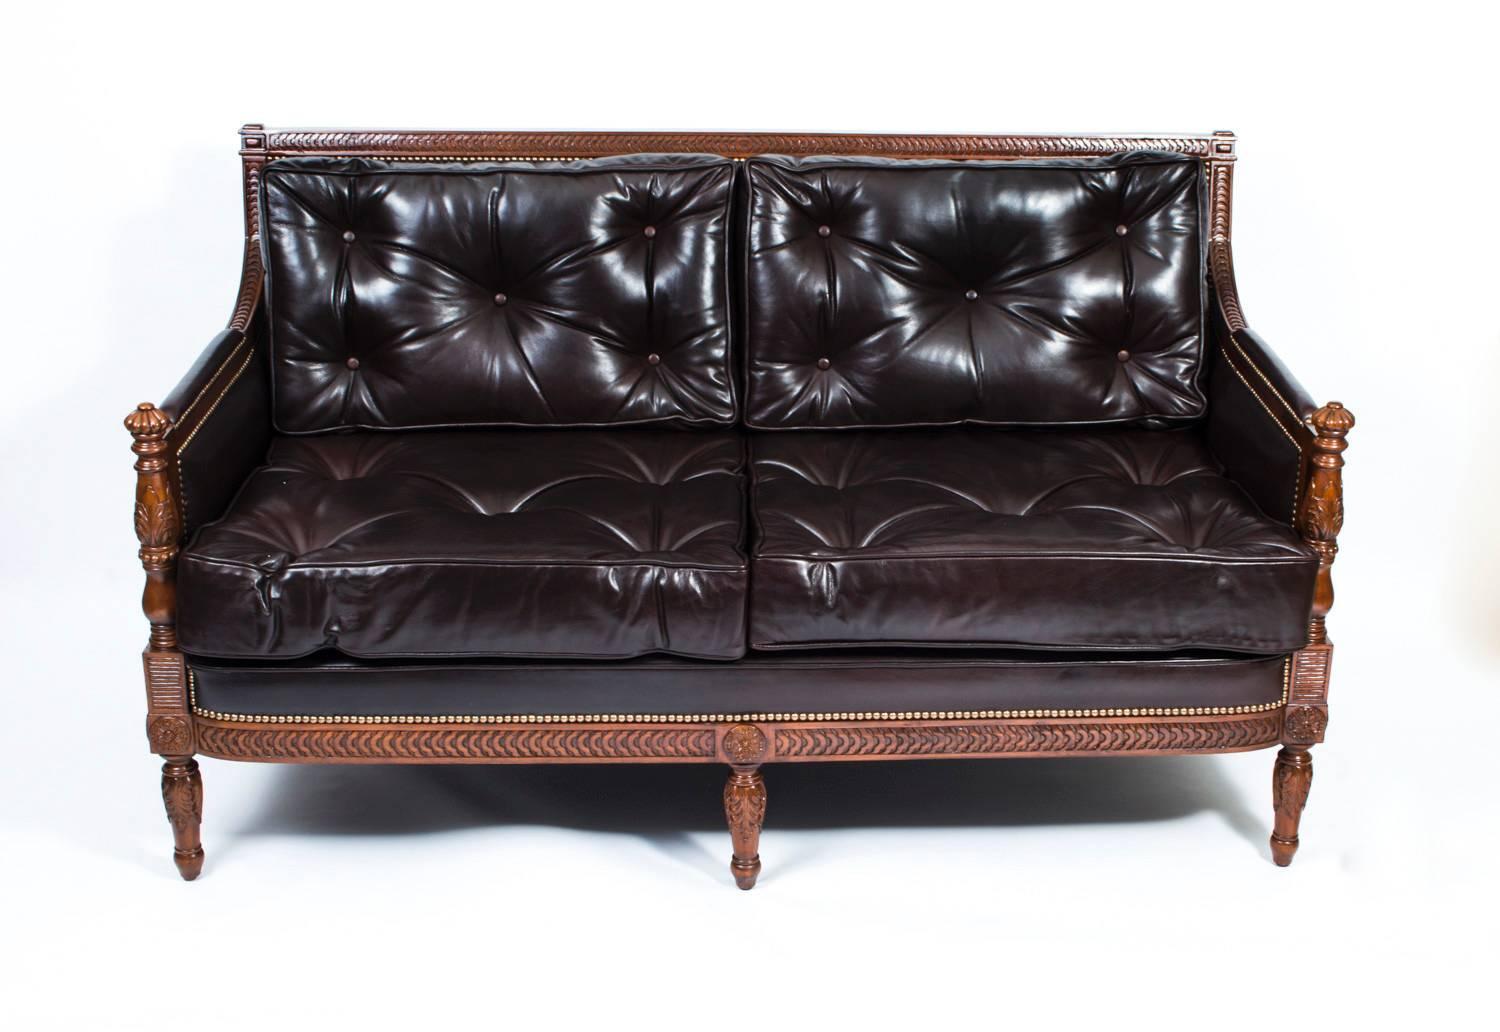 
Description this is a superb very elegant English salon sofa. 

It is made from masterly crafted, hand carved solid mahogany and it has been upholstered in sumptuous dark chocolate brown button back leather, the cushions and the closed arms and